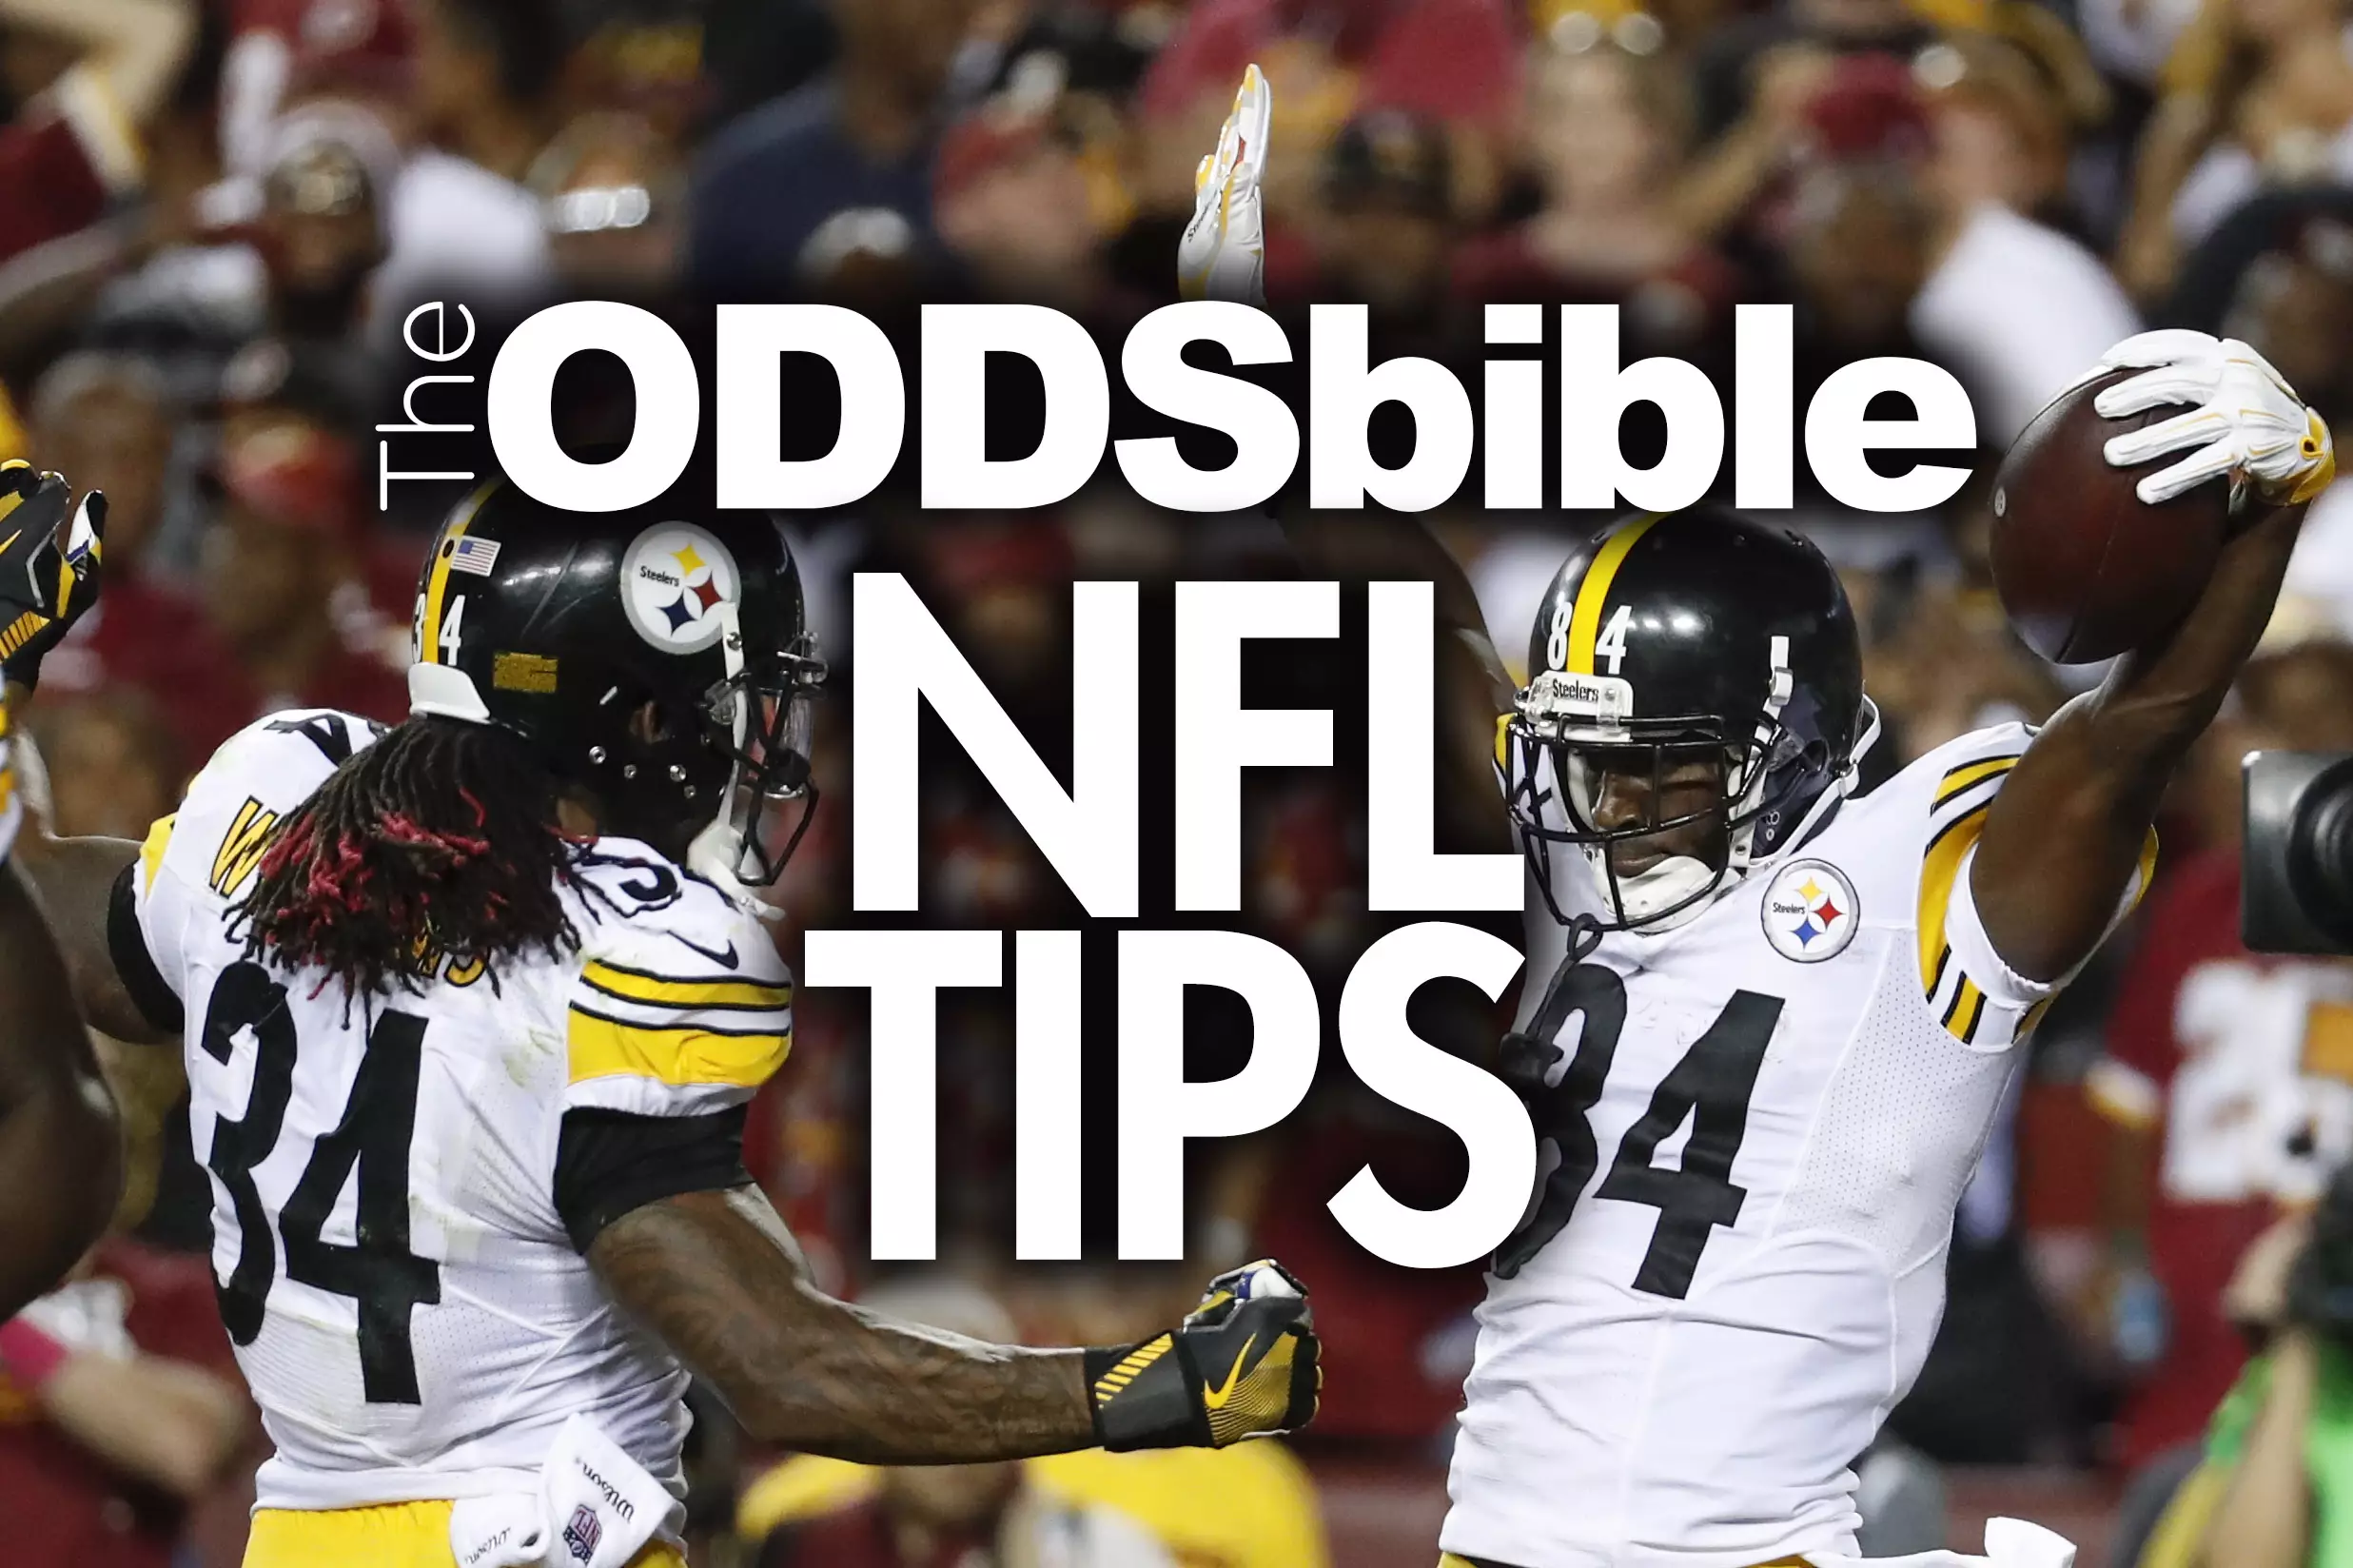 TheODDSbible's NFL Handicapper Picks Out Four Money Lines With Great Value